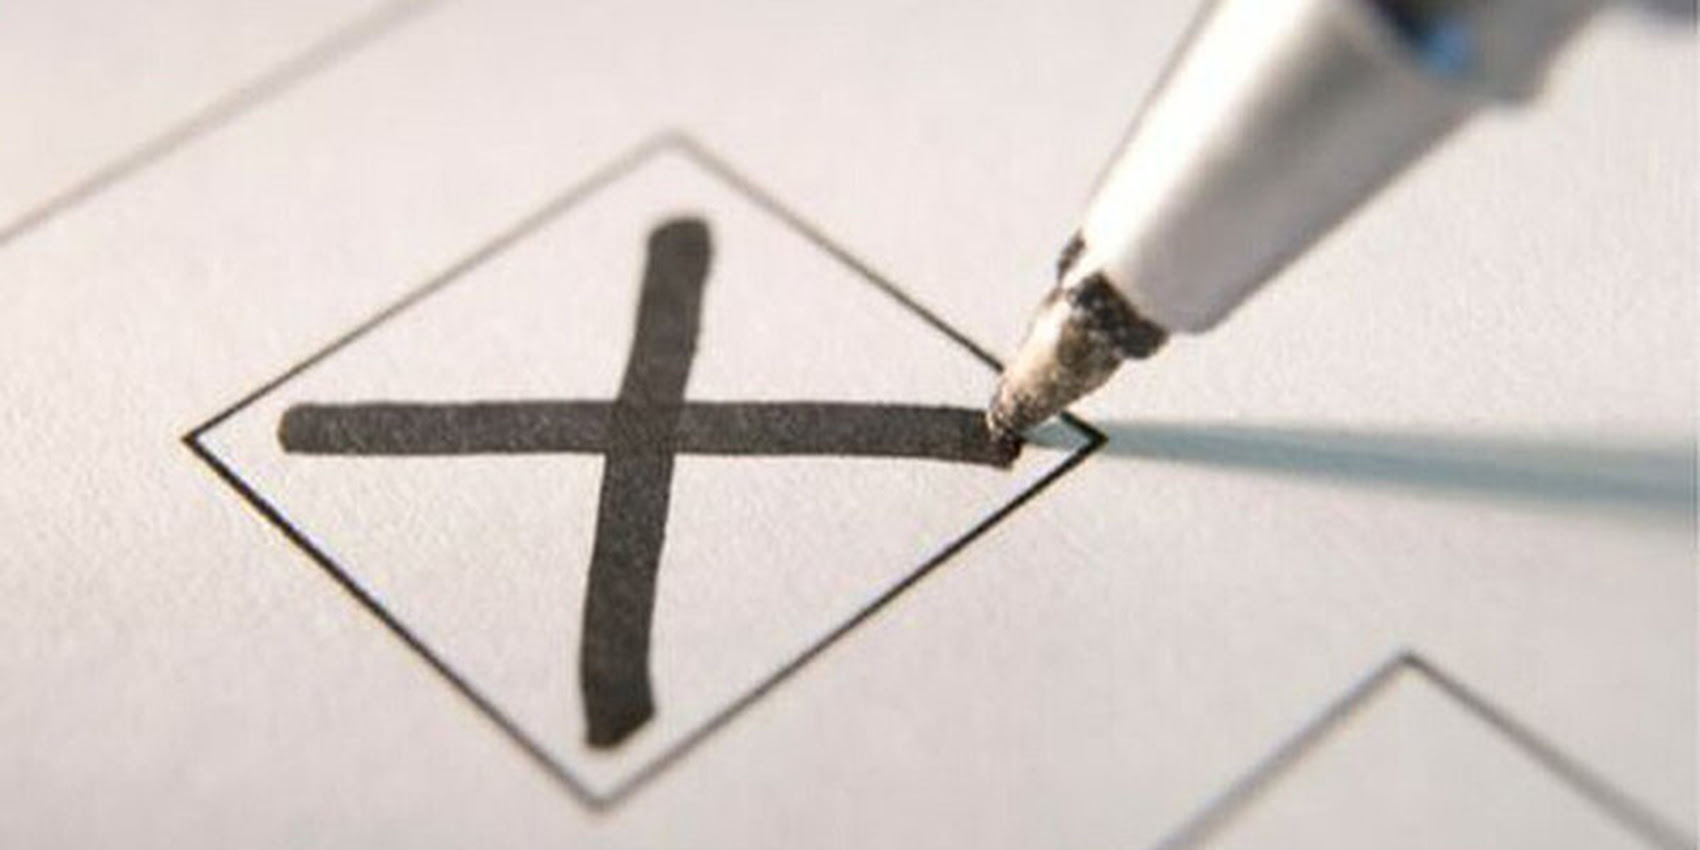 A pen marks an X on a voting card.